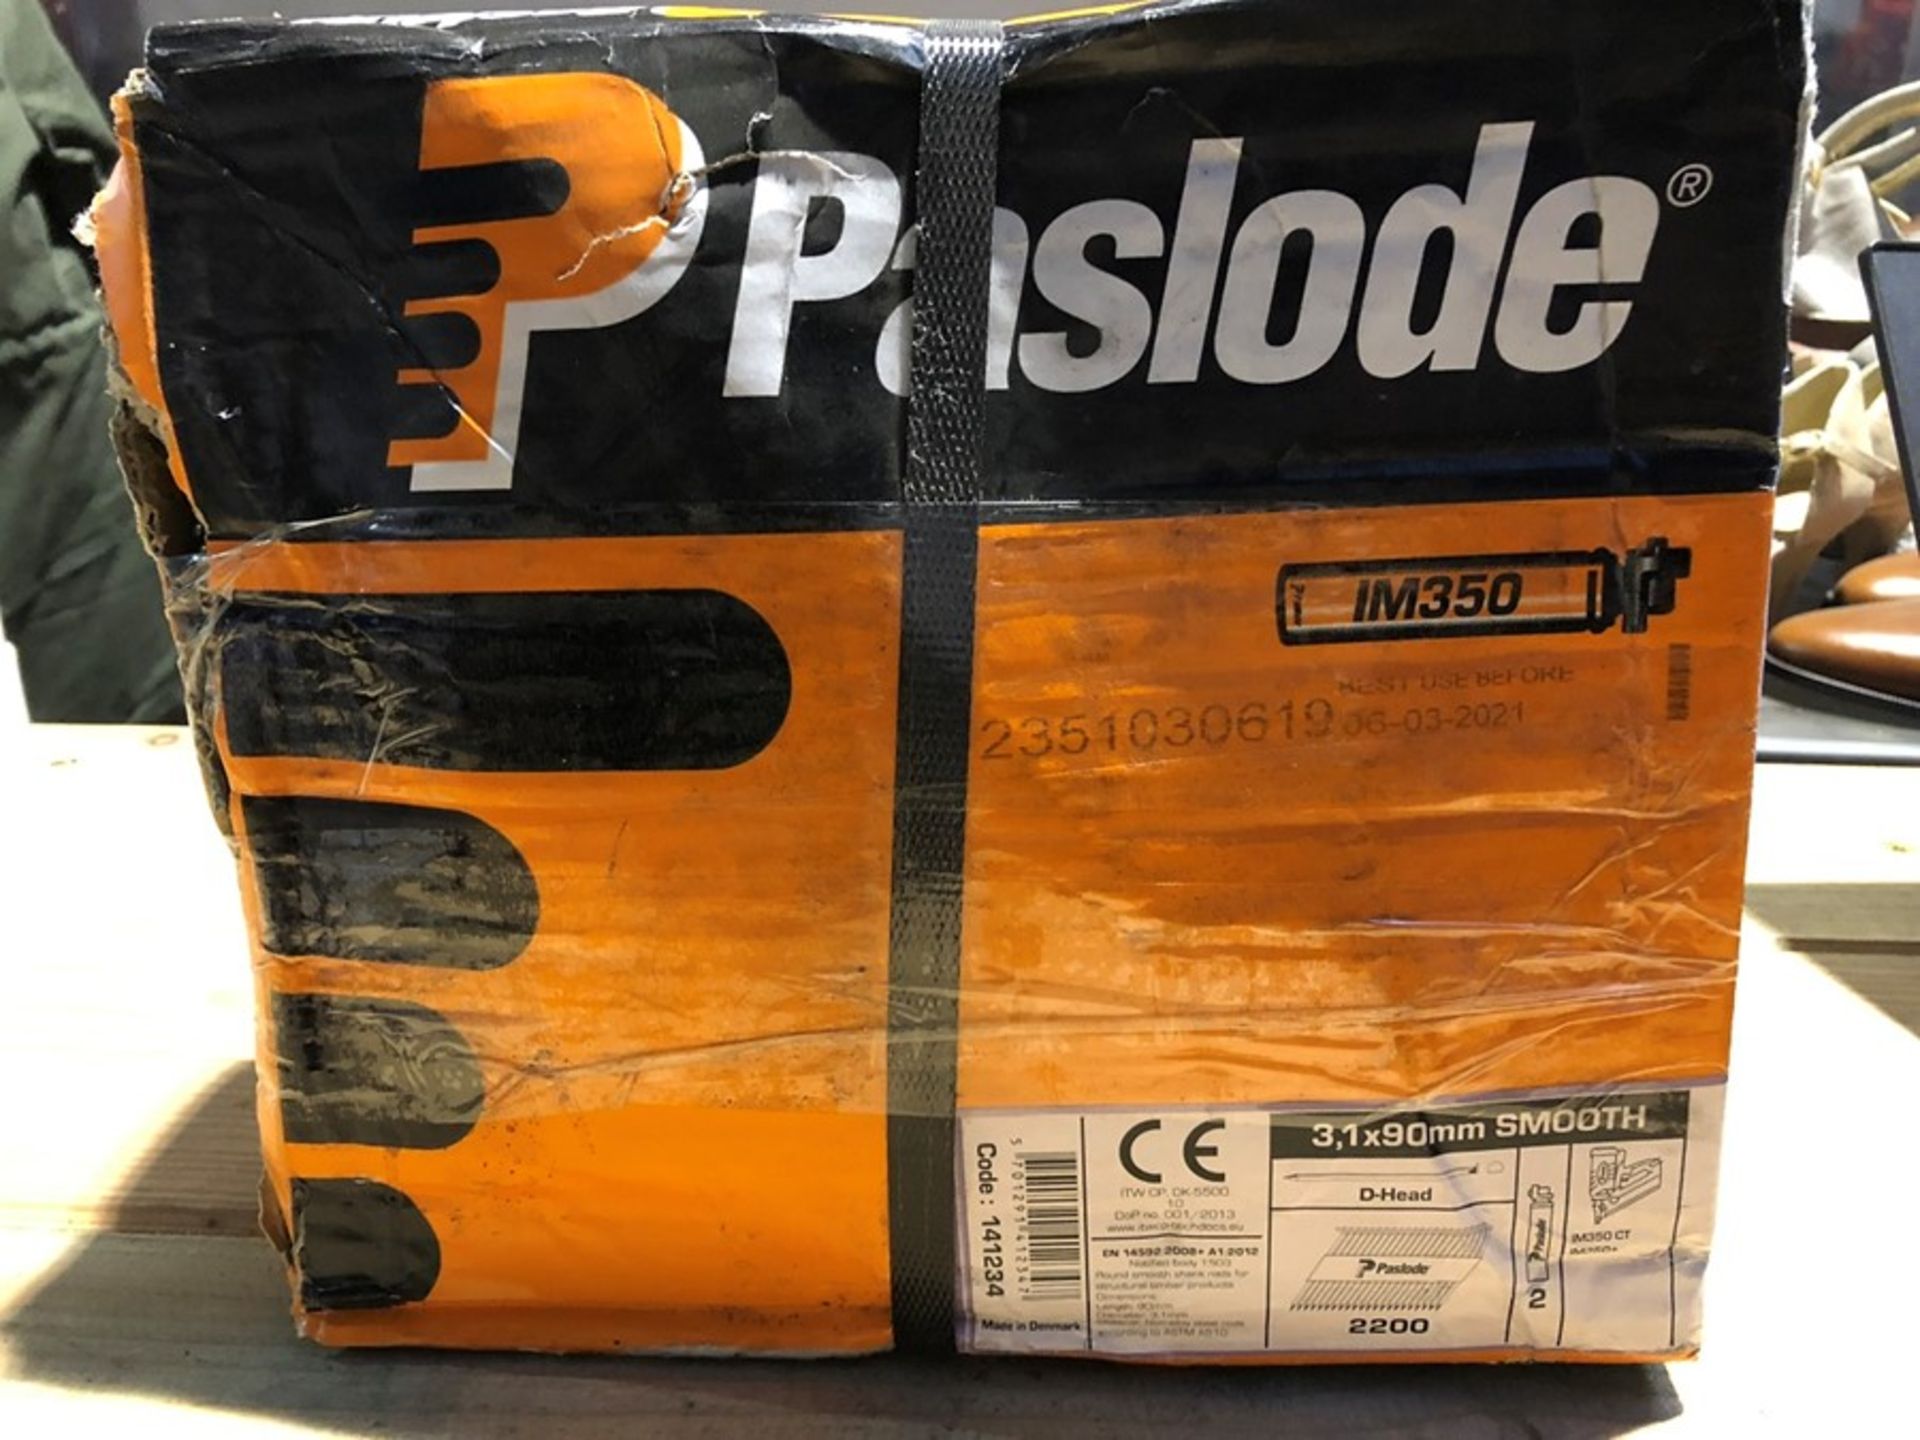 1 BOX OF PASLODE IM350 SMOOTH D-HEAD NAILS WITH TWO FUEL CELLS - APPROX 2200 NAILS PER BOX / SIZE: